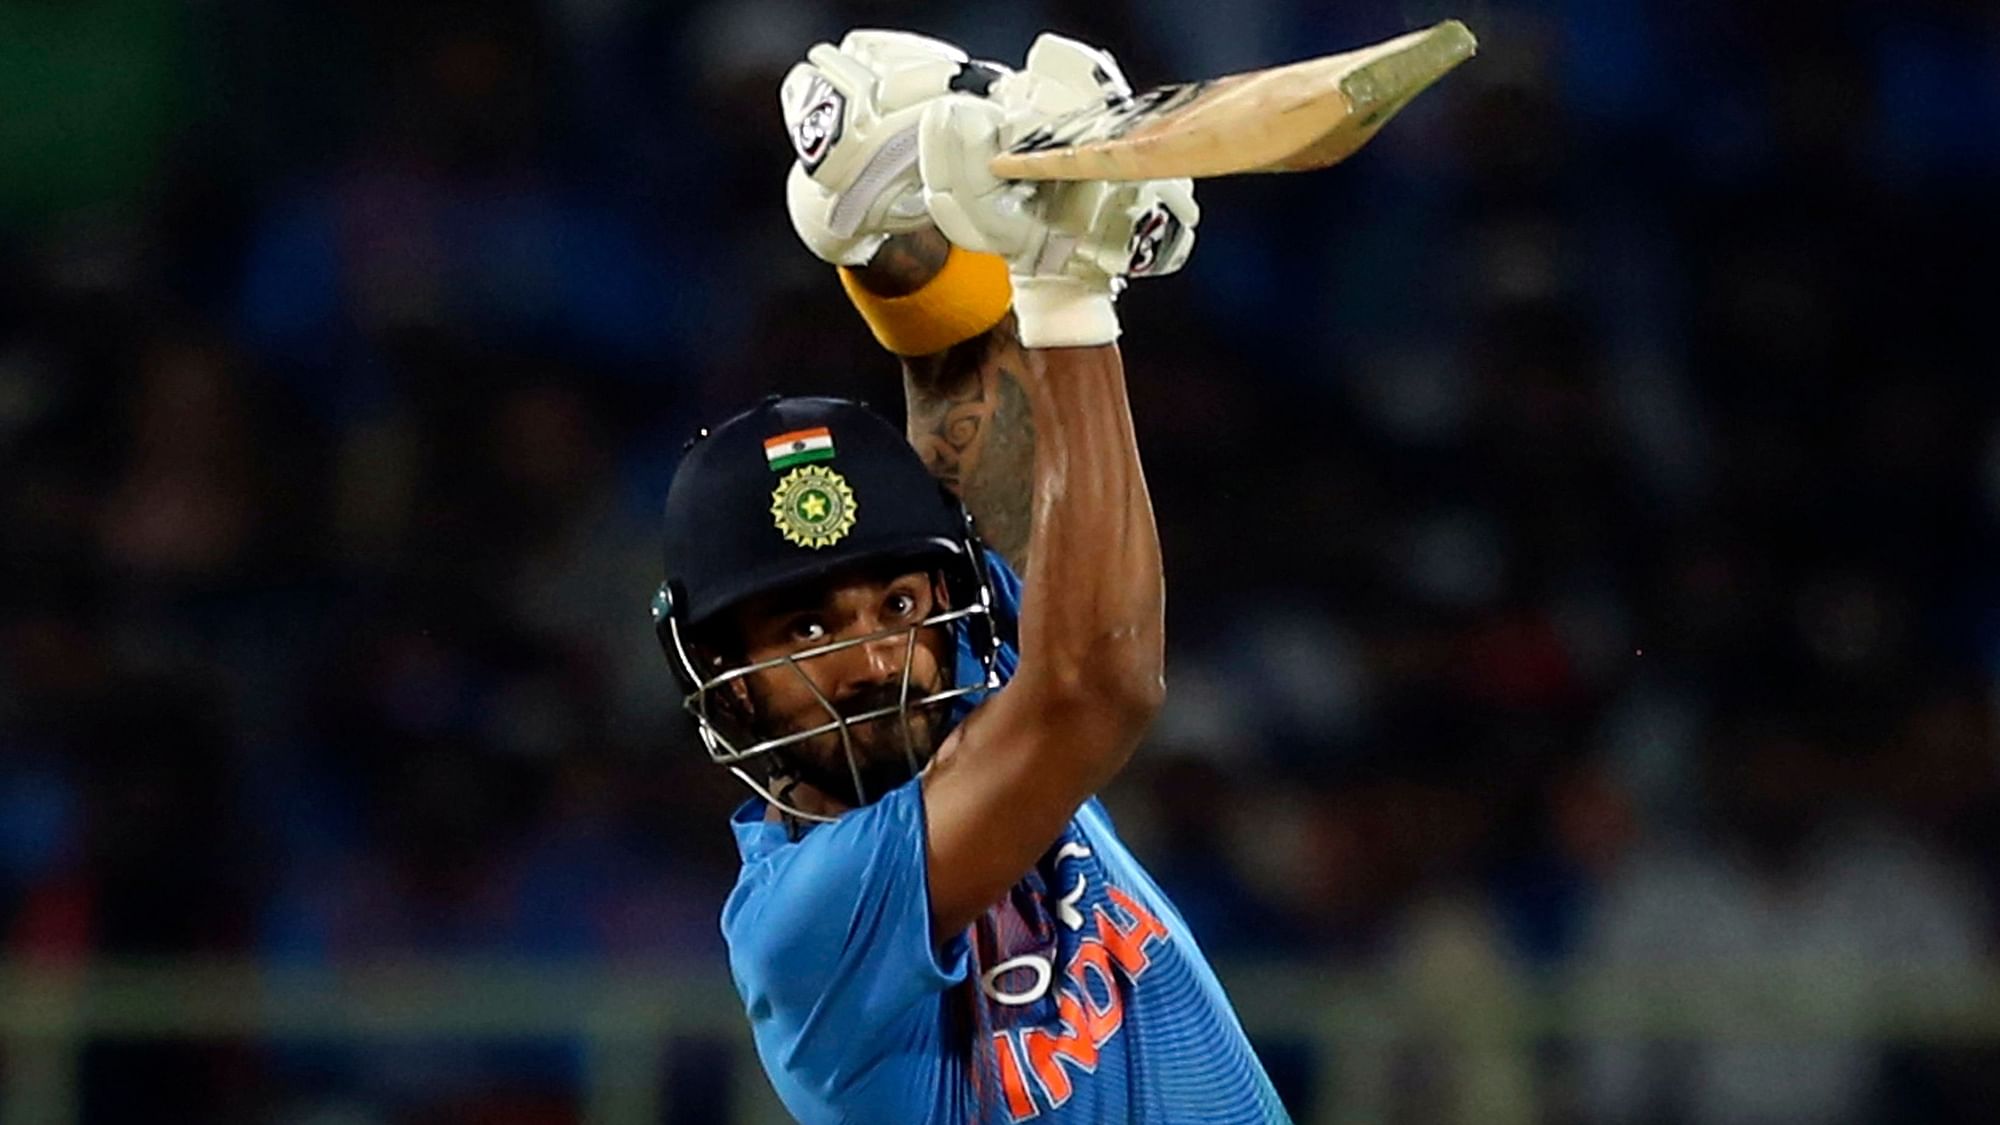 KL Rahul made his ODI debut in 2016 against Zimbabwe, scoring 343 runs in 14 matches, including one hundred and two fifties.